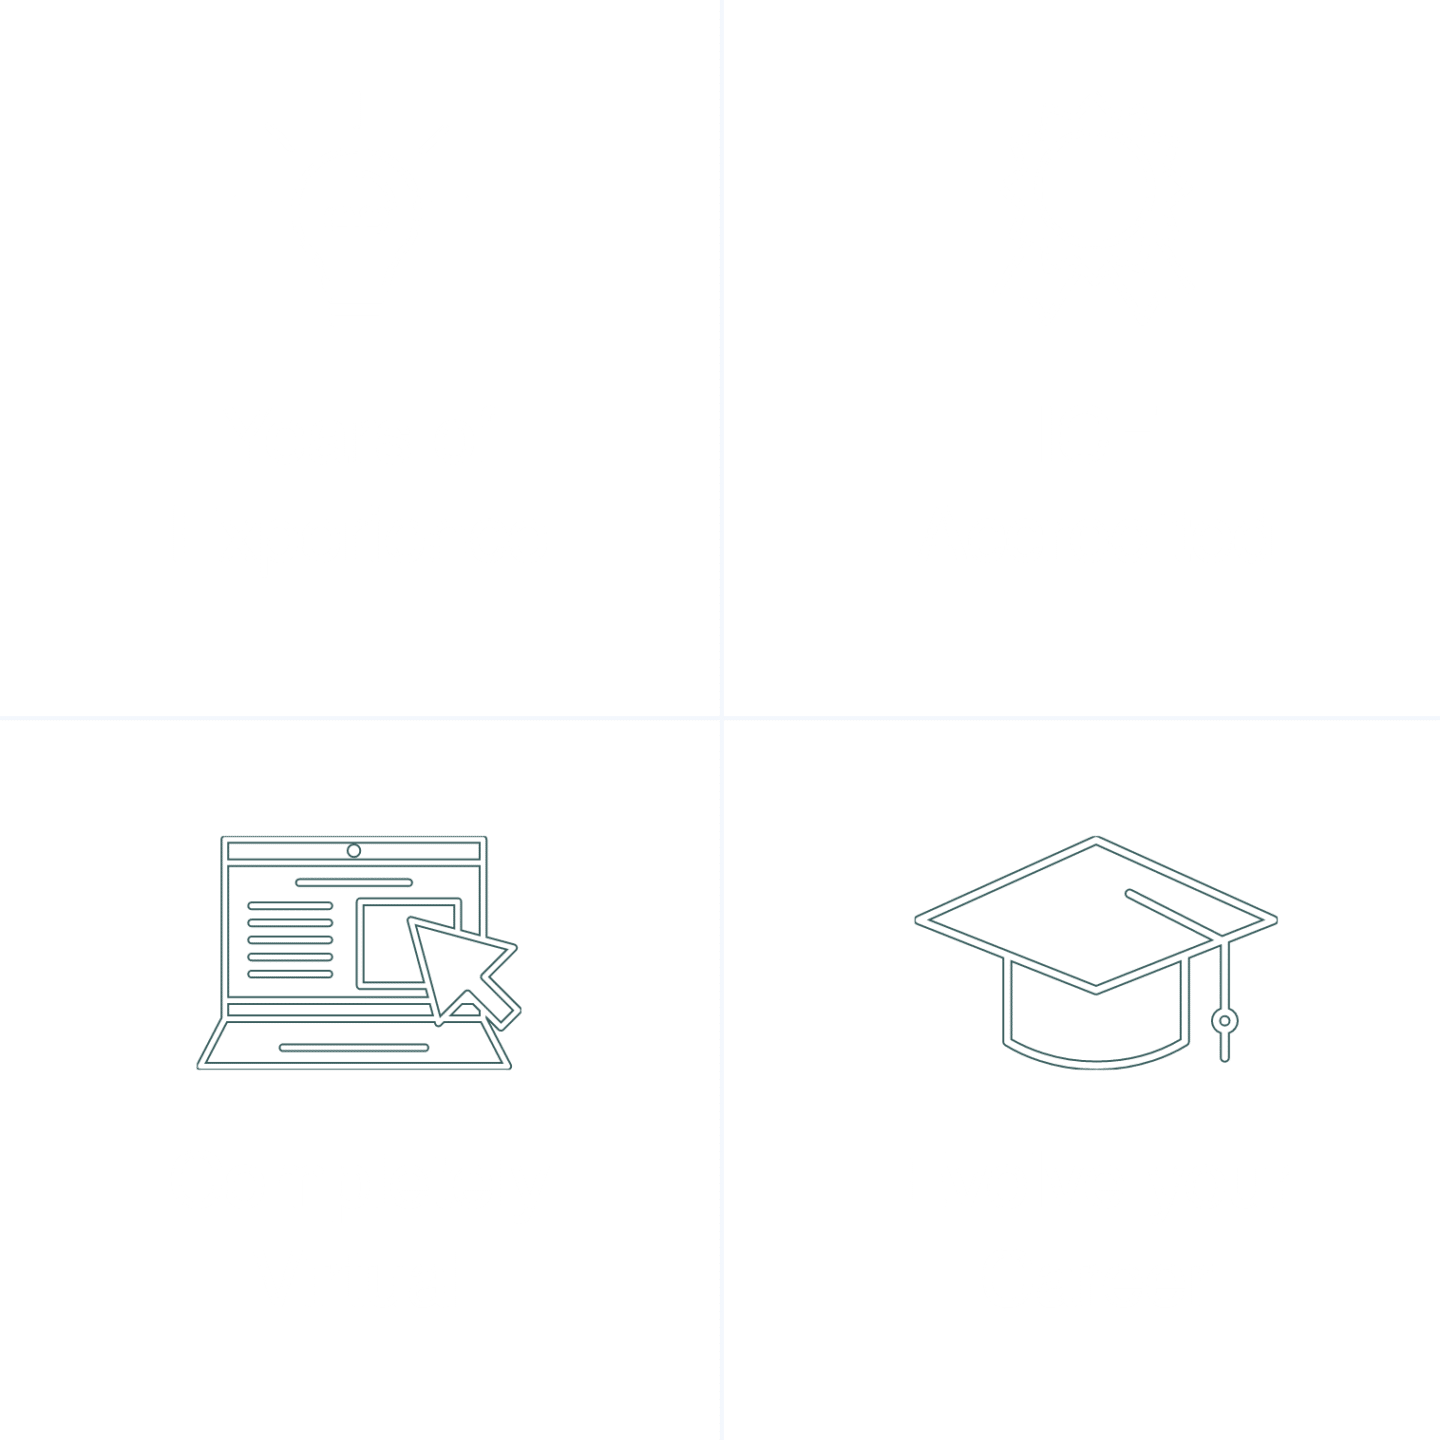 years of experience, ICF accredited, completely virtual, evolve your career